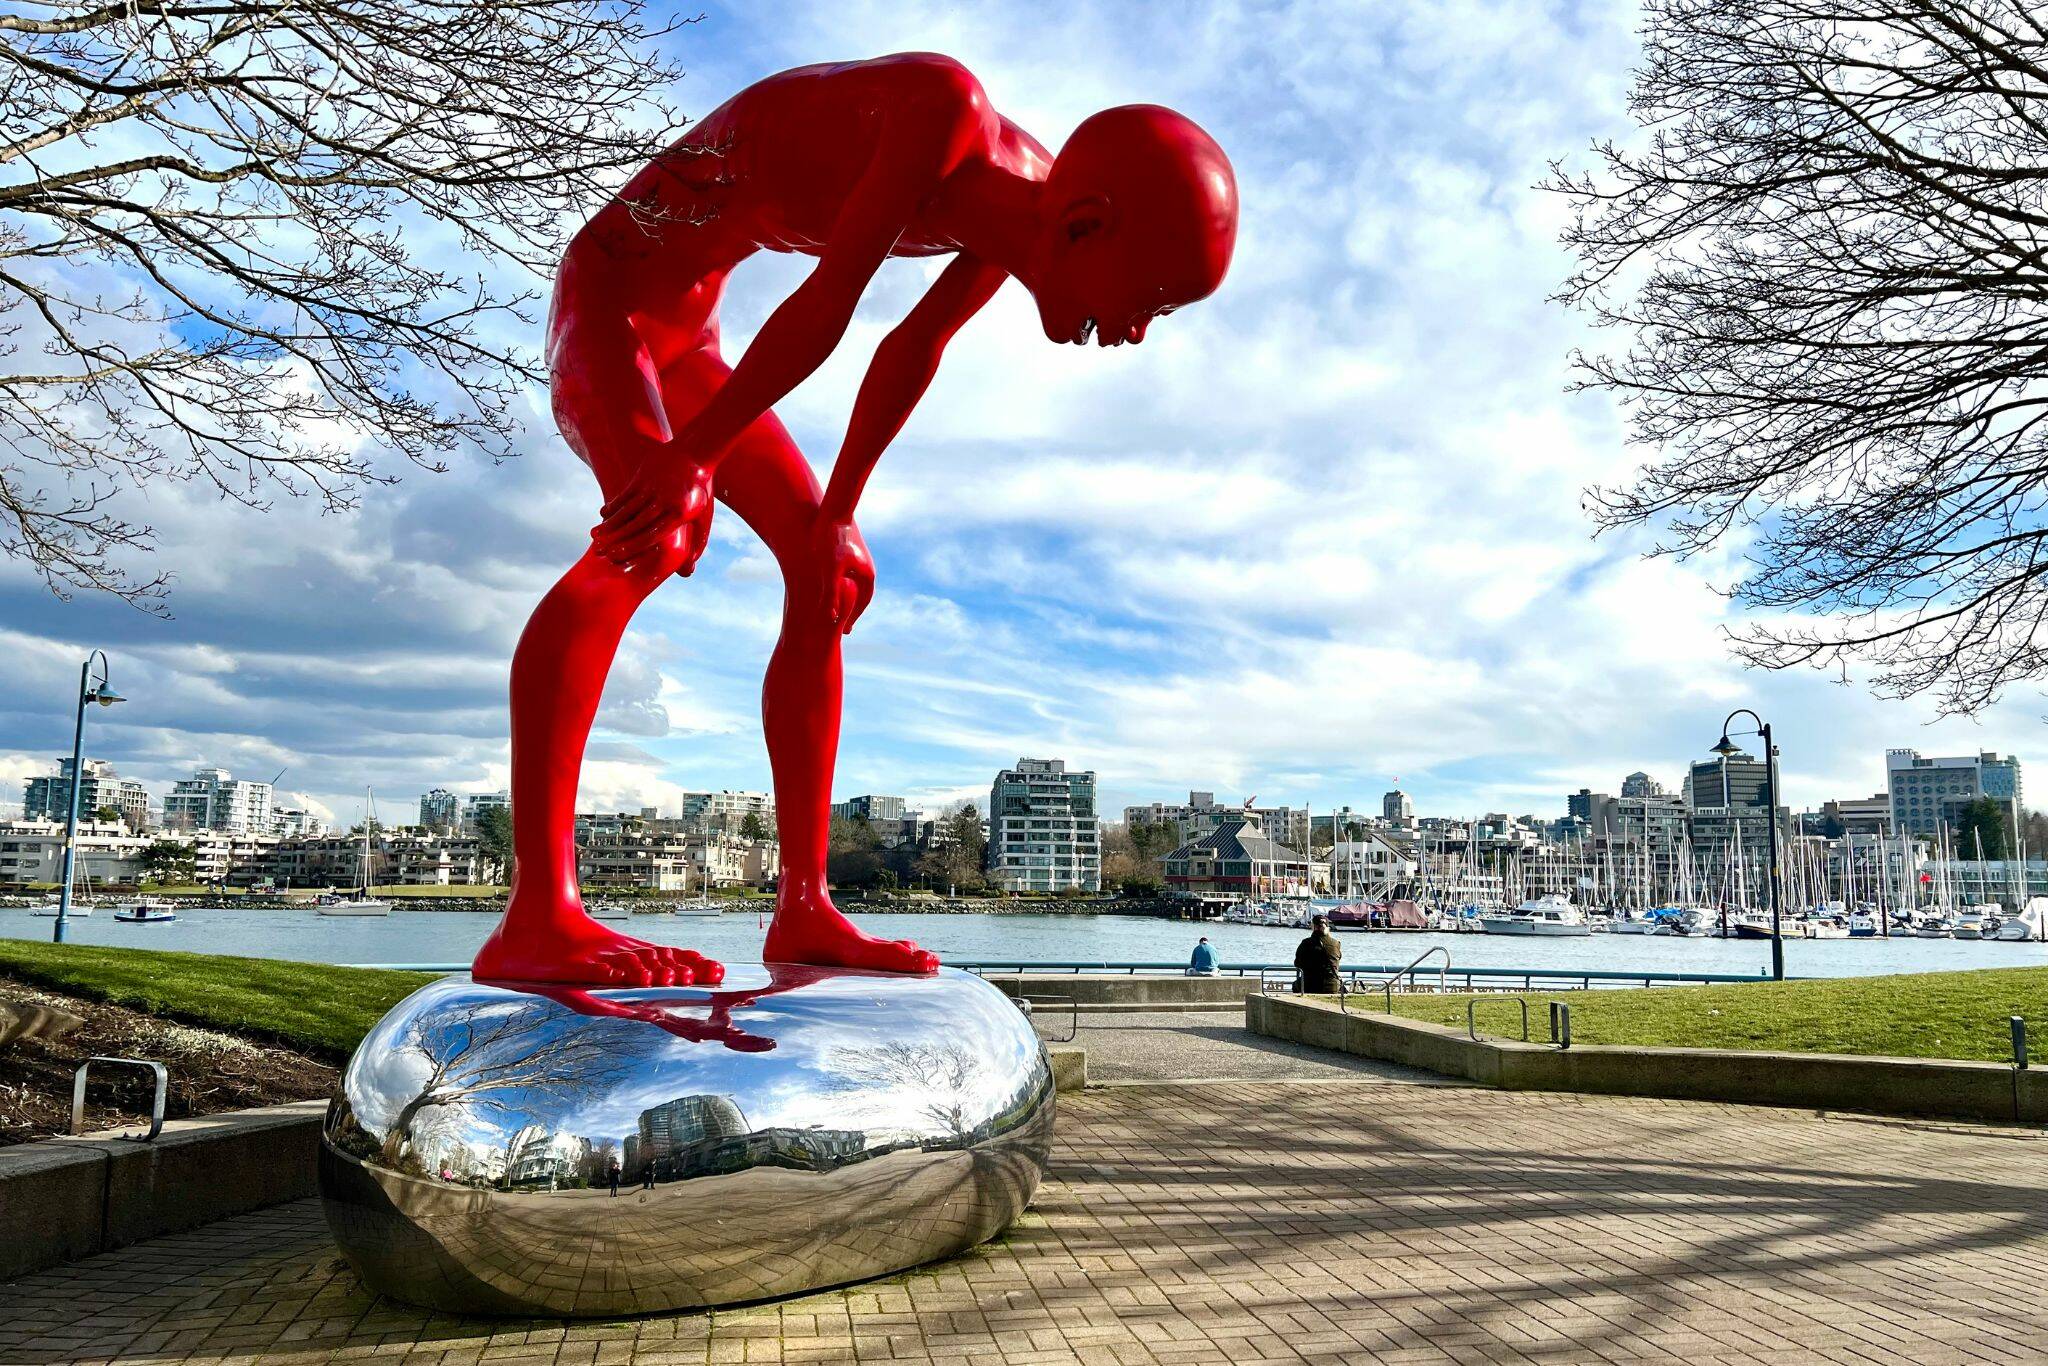 Public art piece along the waterfront in Vancouver, B.C. (Andrea Brown / The Herald)